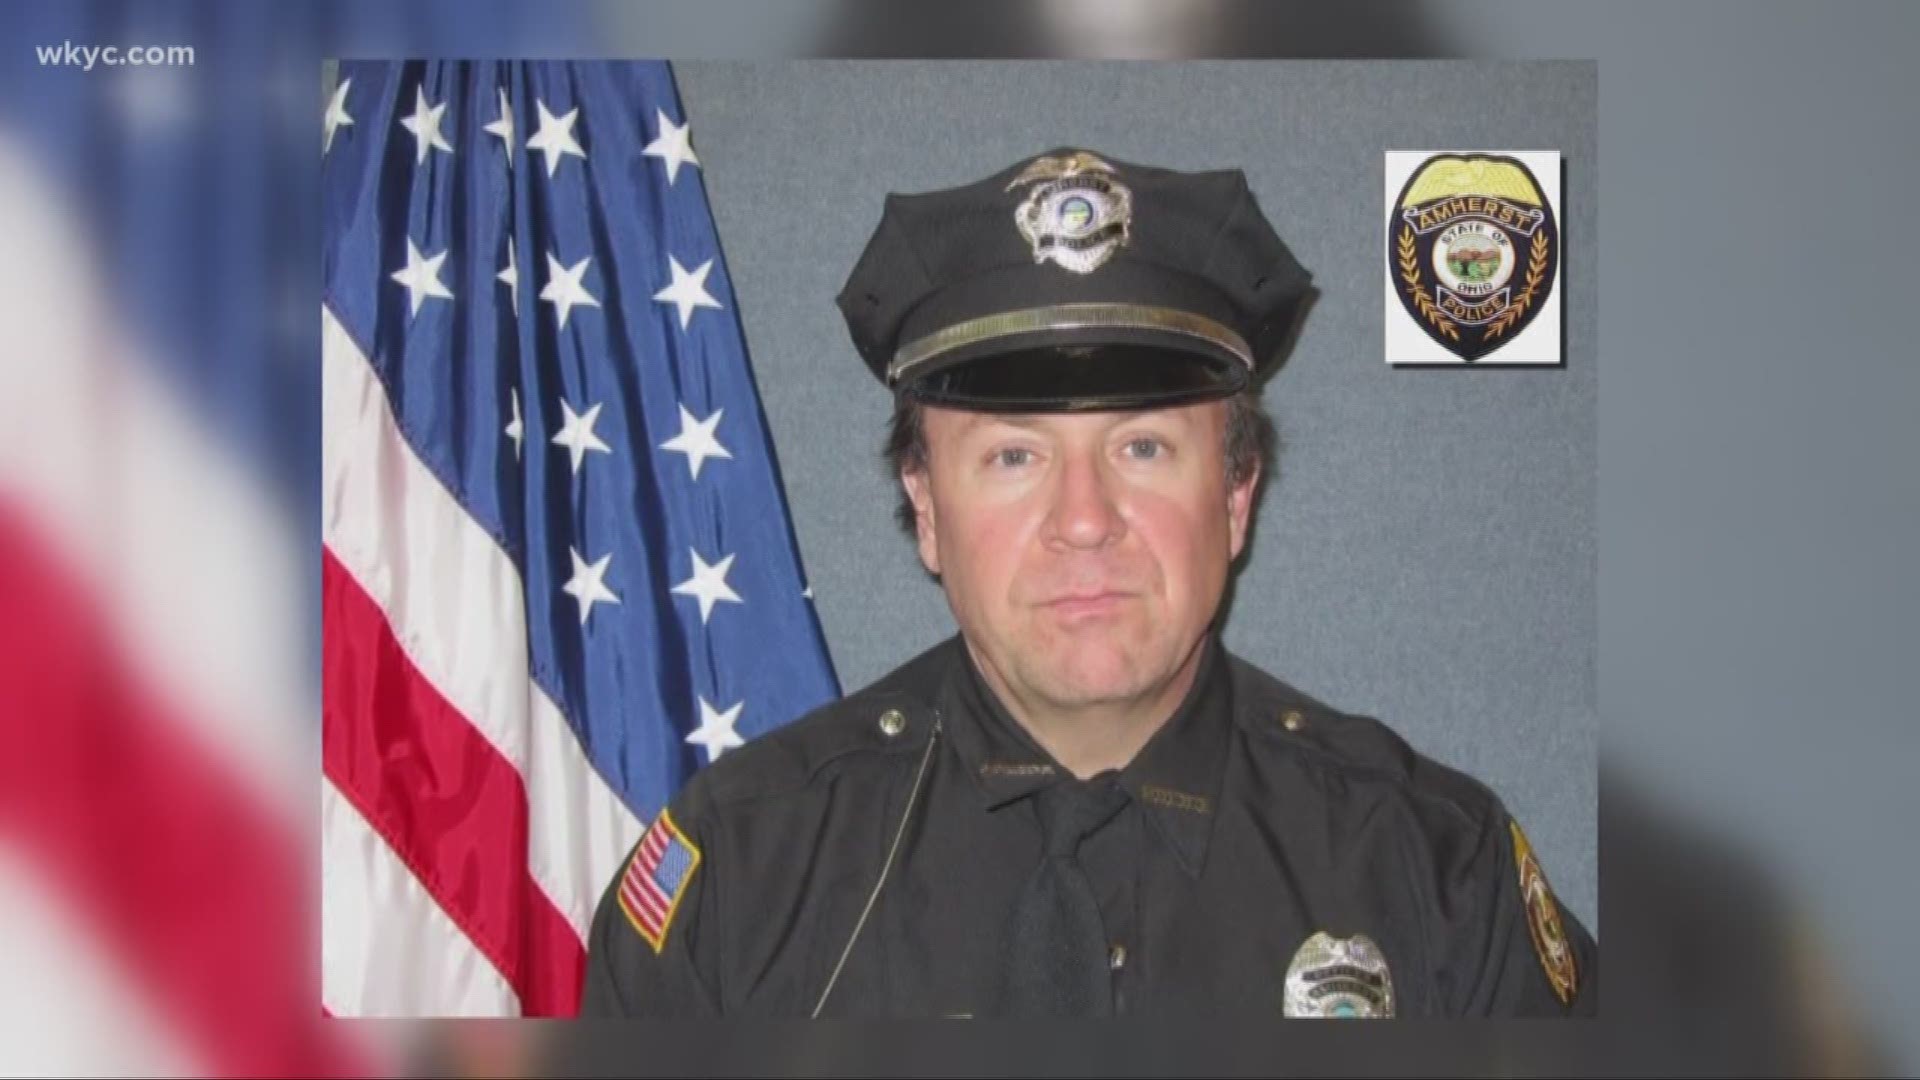 Amherst Police holds blood drive in honor of fellow officer